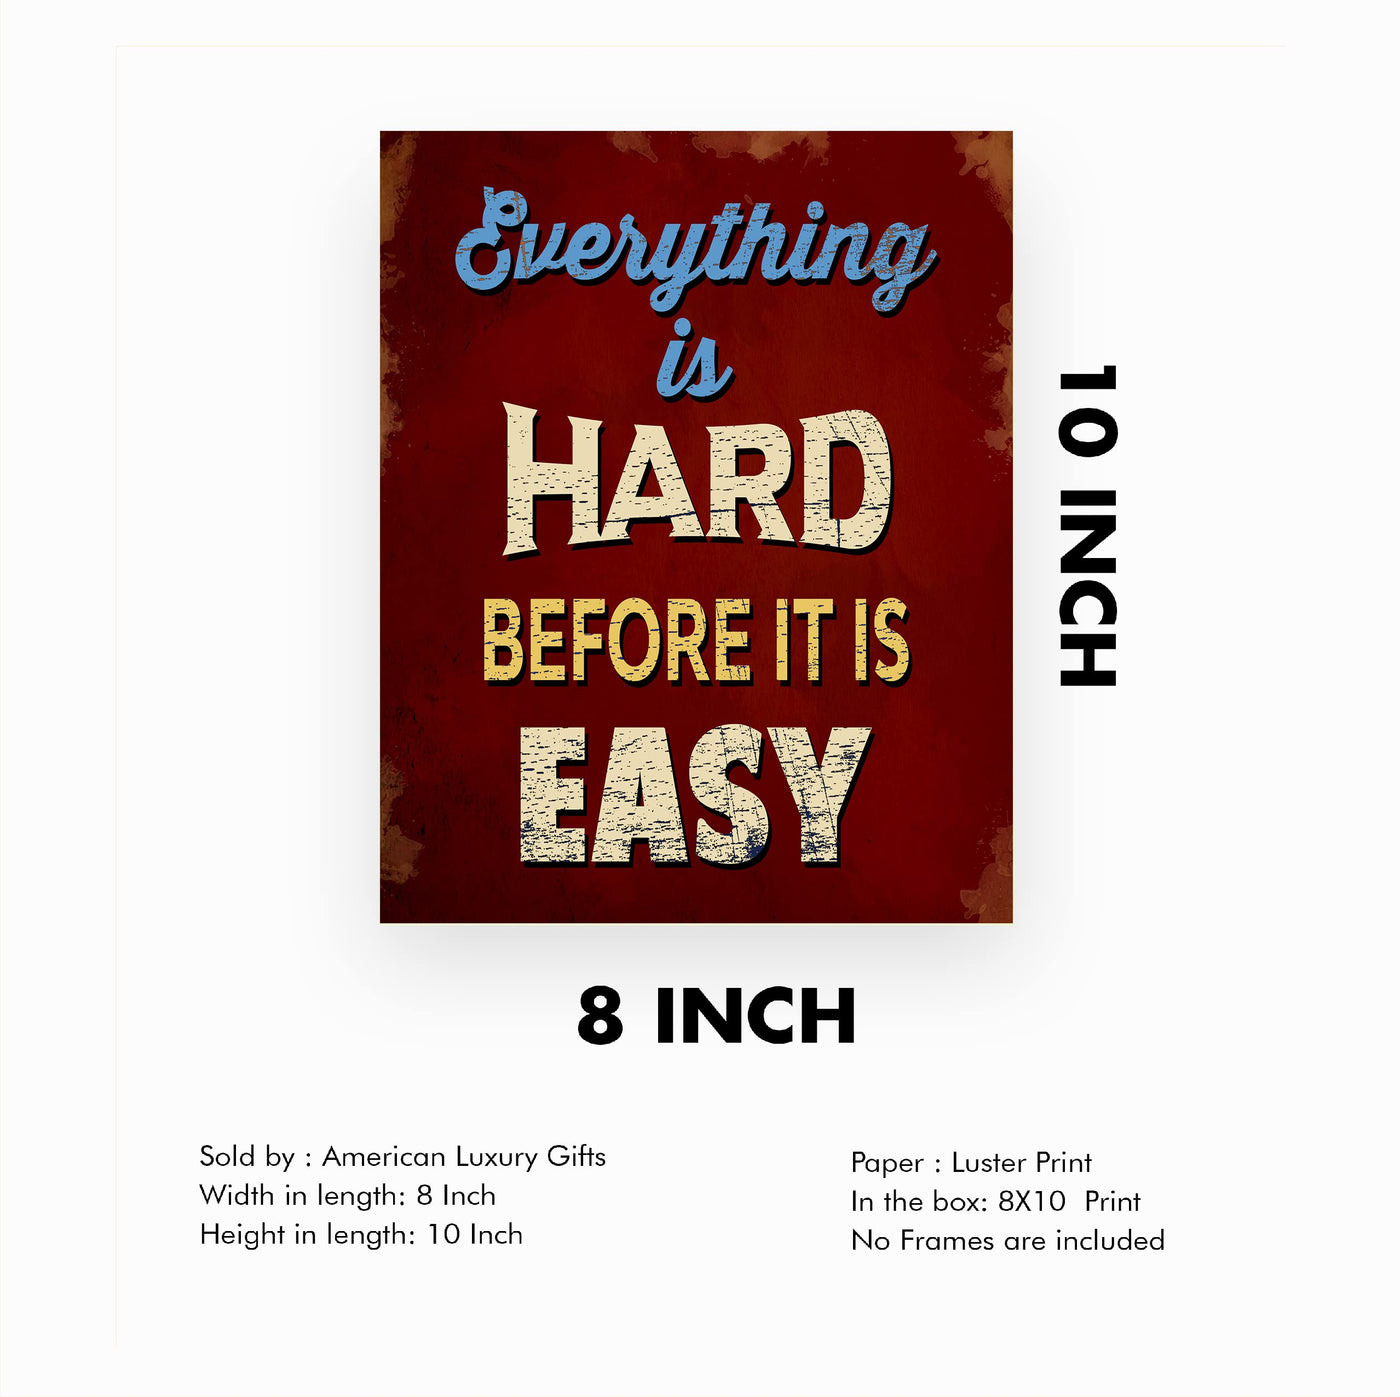 Everything Is Hard Before It Is Easy Motivational Quotes Wall Art -8 x 10" Typographic Poster Print -Ready to Frame. Inspirational Replica Sign for Home-School-Gym-Locker Room & Motivation Decor!